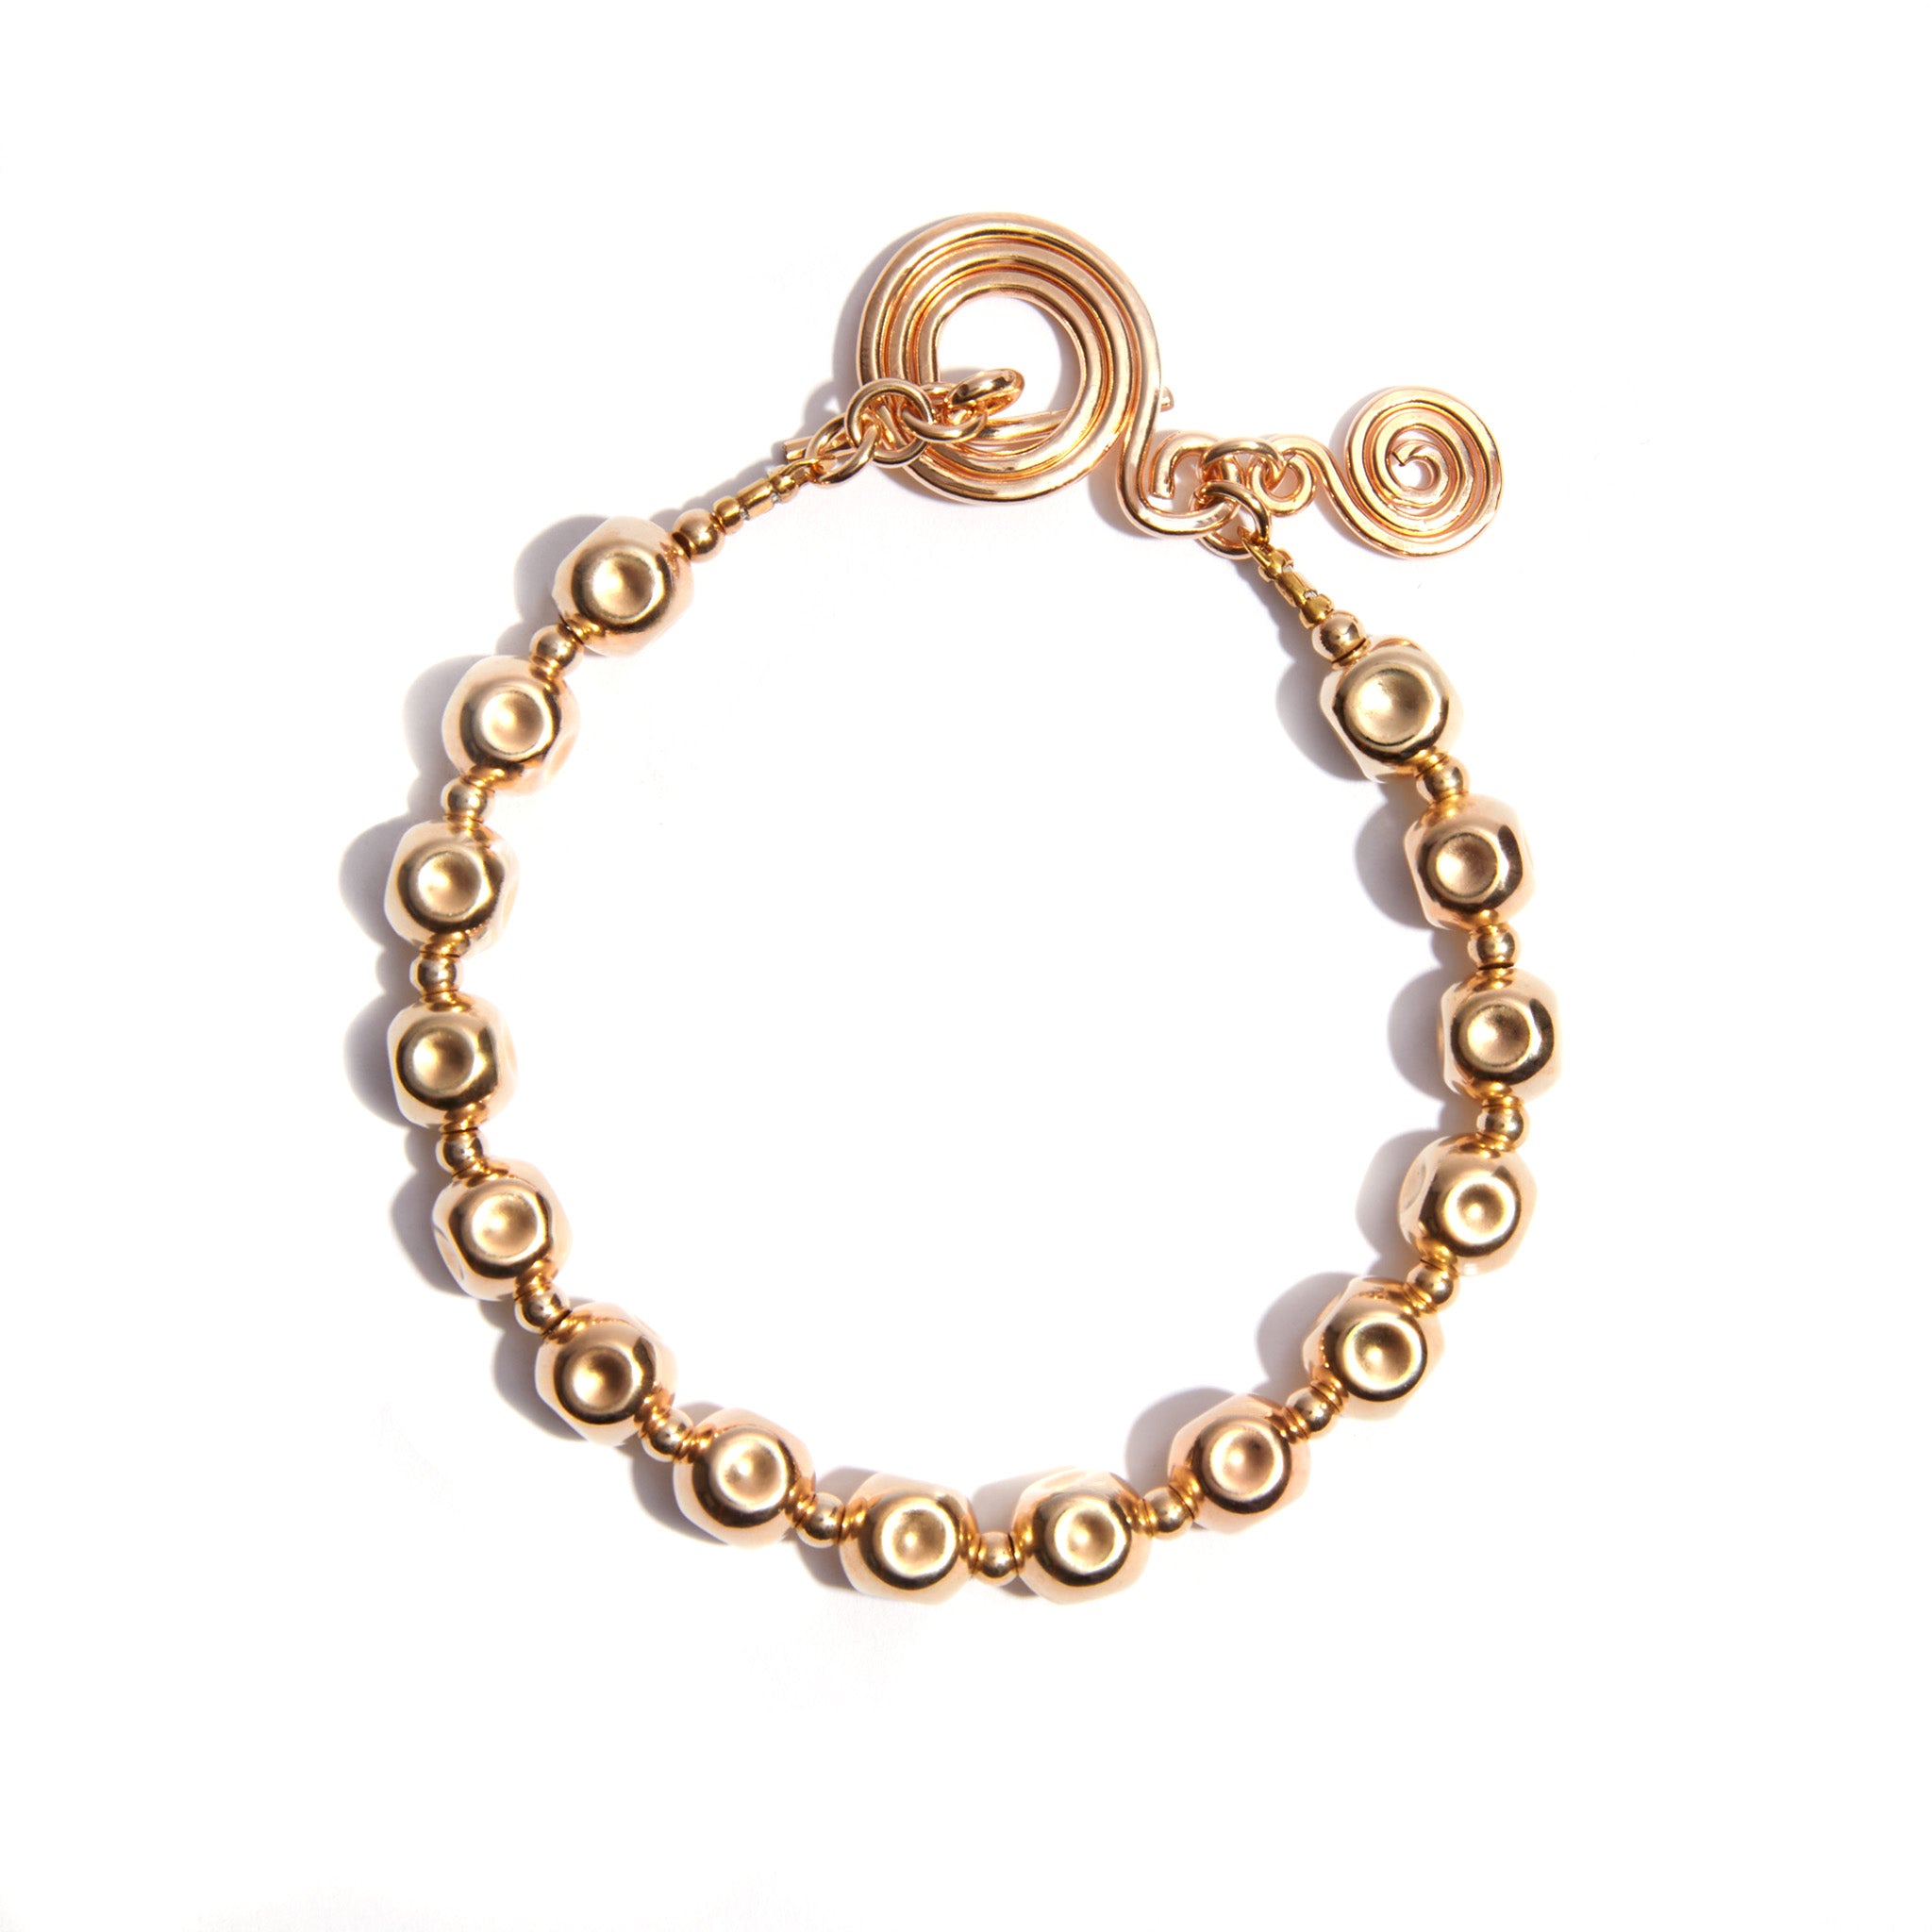 The Celtic Spiral Clasp Bracelet is a sleek and sophisticated accessory, crafted from luxurious yellow gold. Perfect for both casual and formal wear, it adds a touch of timeless elegance to any outfit.